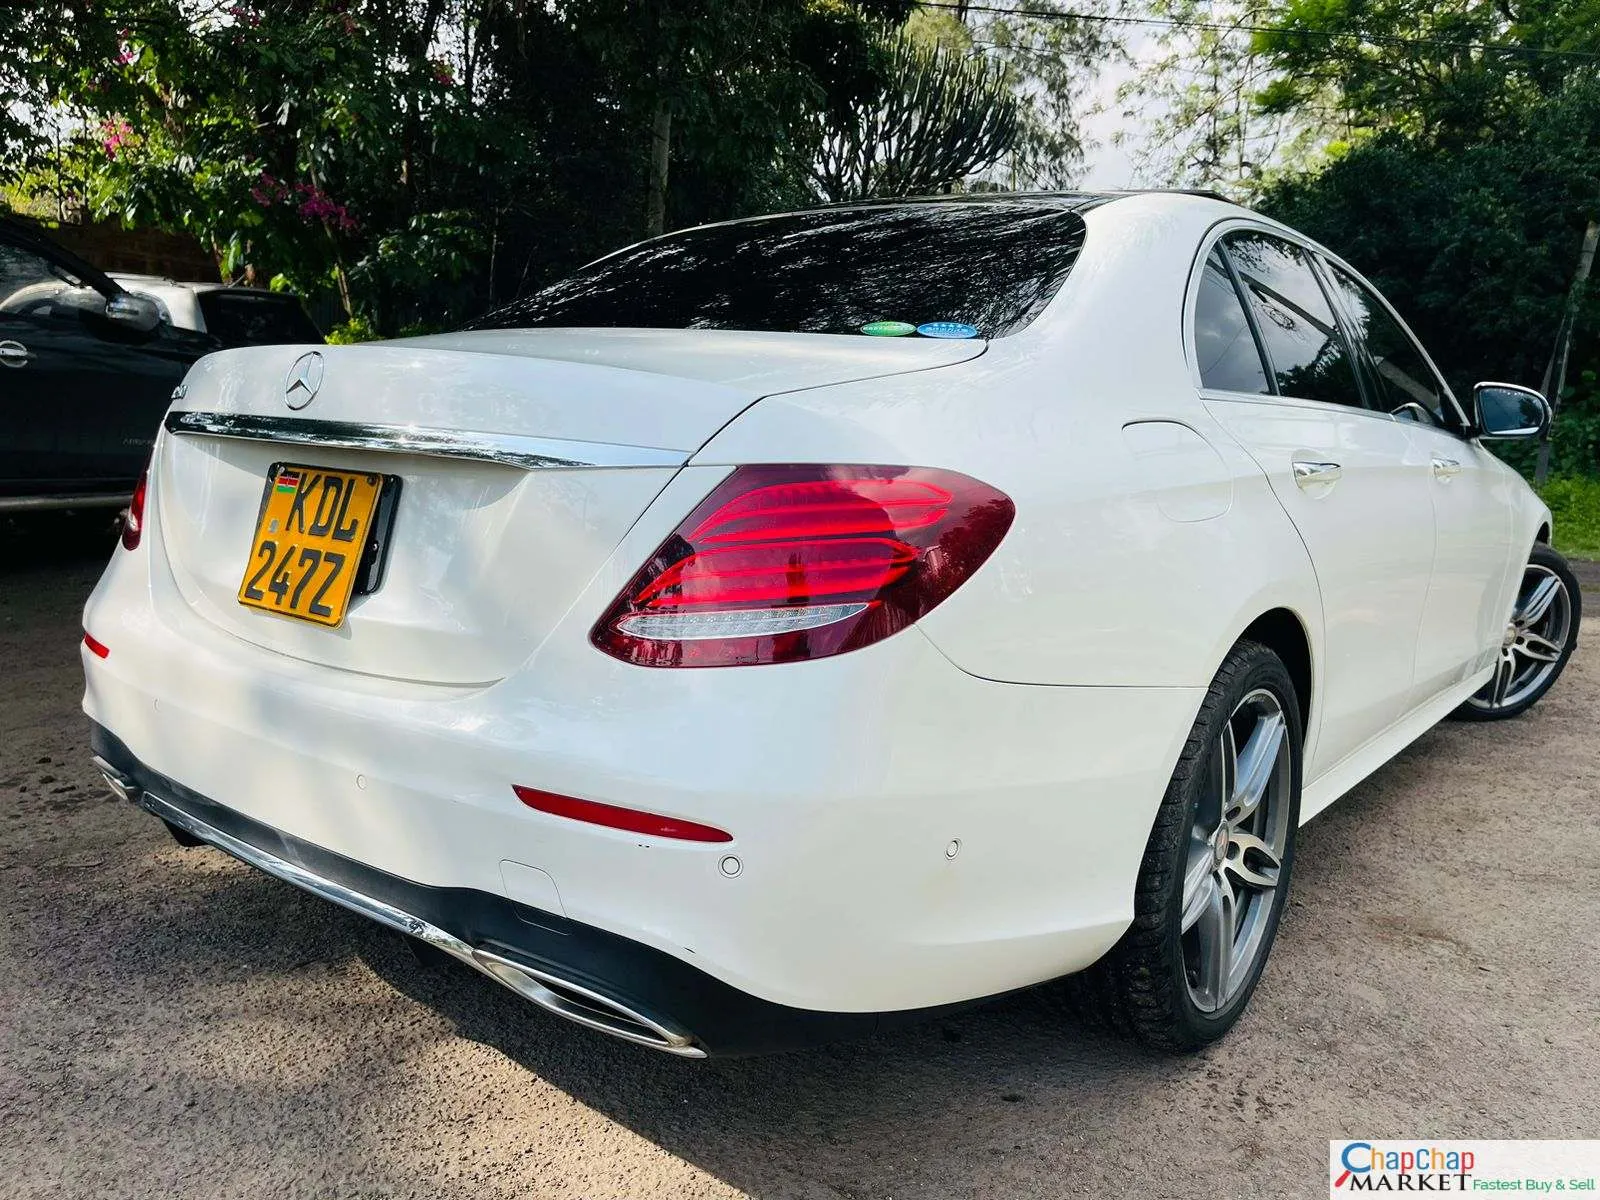 Mercedes Benz E250 for sale in Kenya Cheapest You Pay 30% DEPOSIT Trade in OK EXCLUSIVE hire purchase installments 2017 panoramic